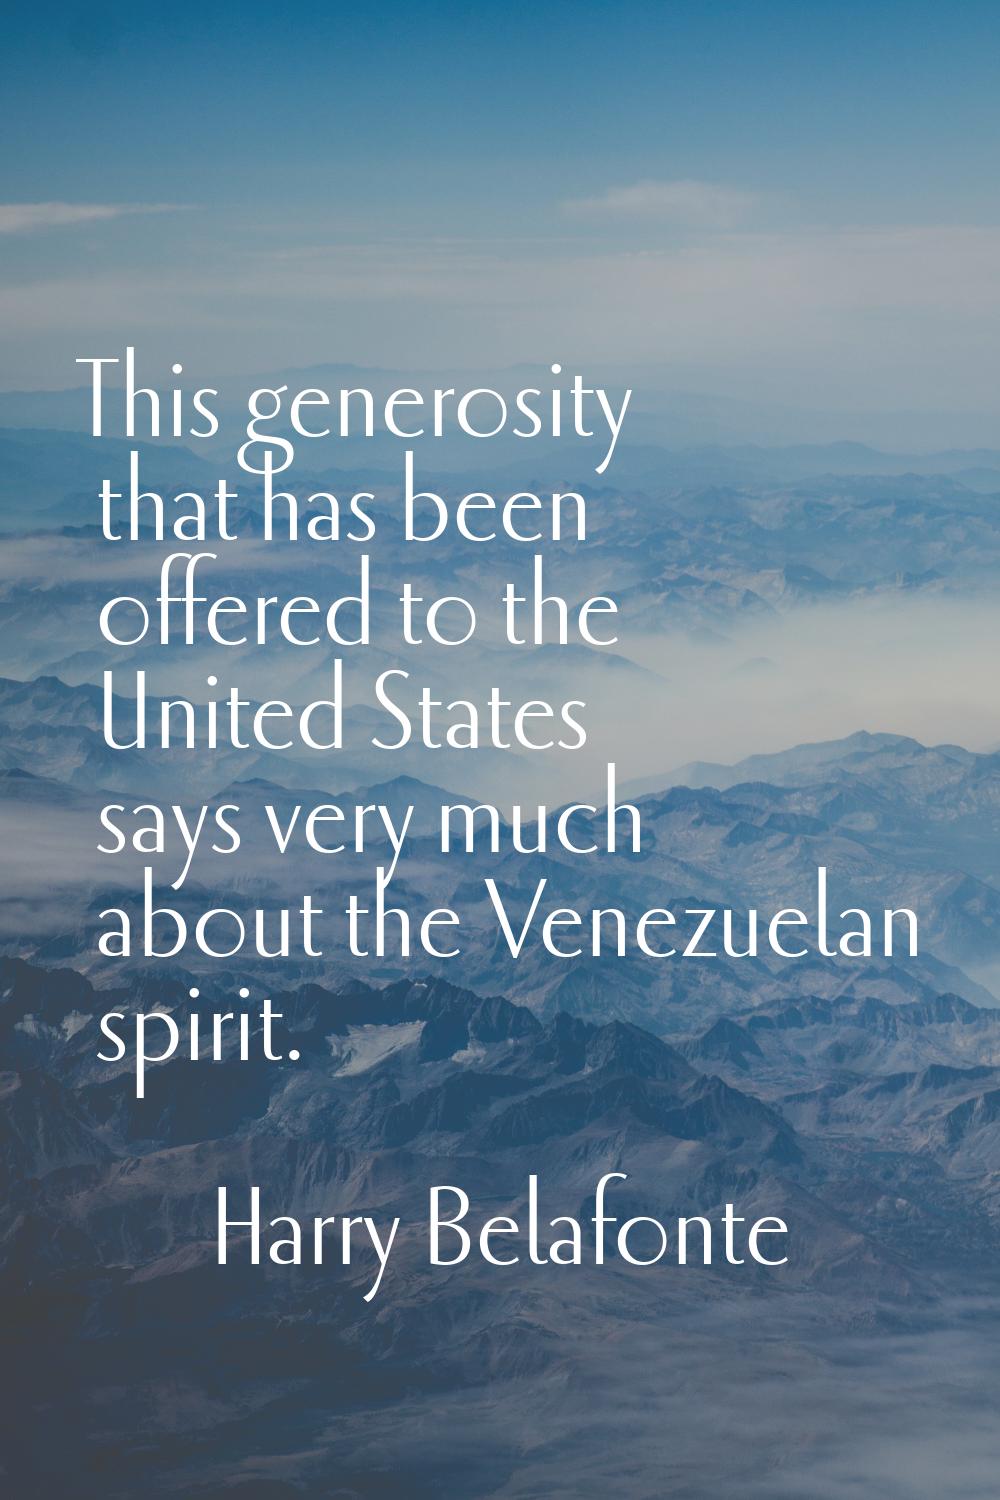 This generosity that has been offered to the United States says very much about the Venezuelan spir